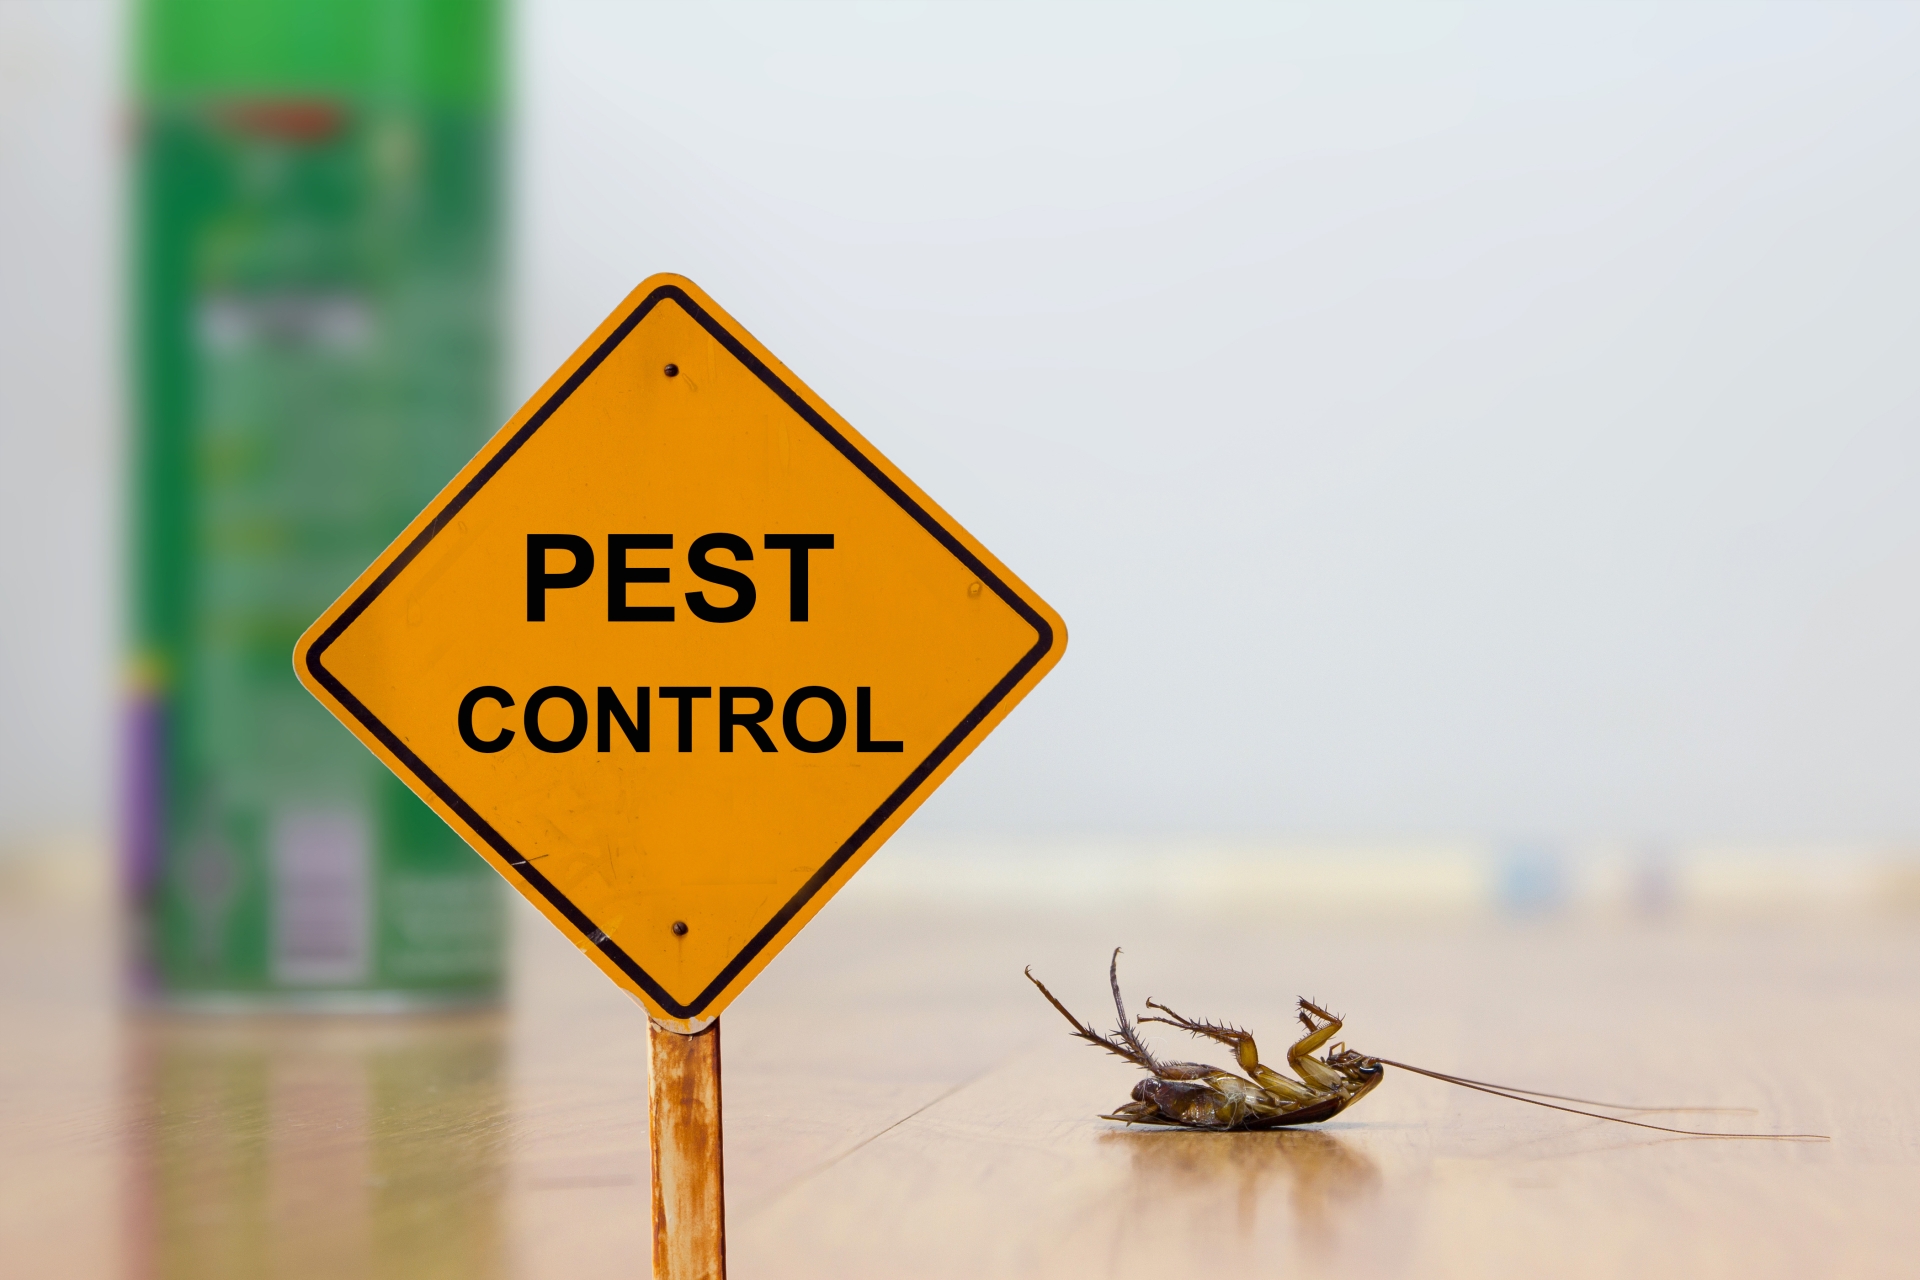 24 Hour Pest Control, Pest Control in Chertsey, Ottershaw, Longcross, KT16. Call Now 020 8166 9746